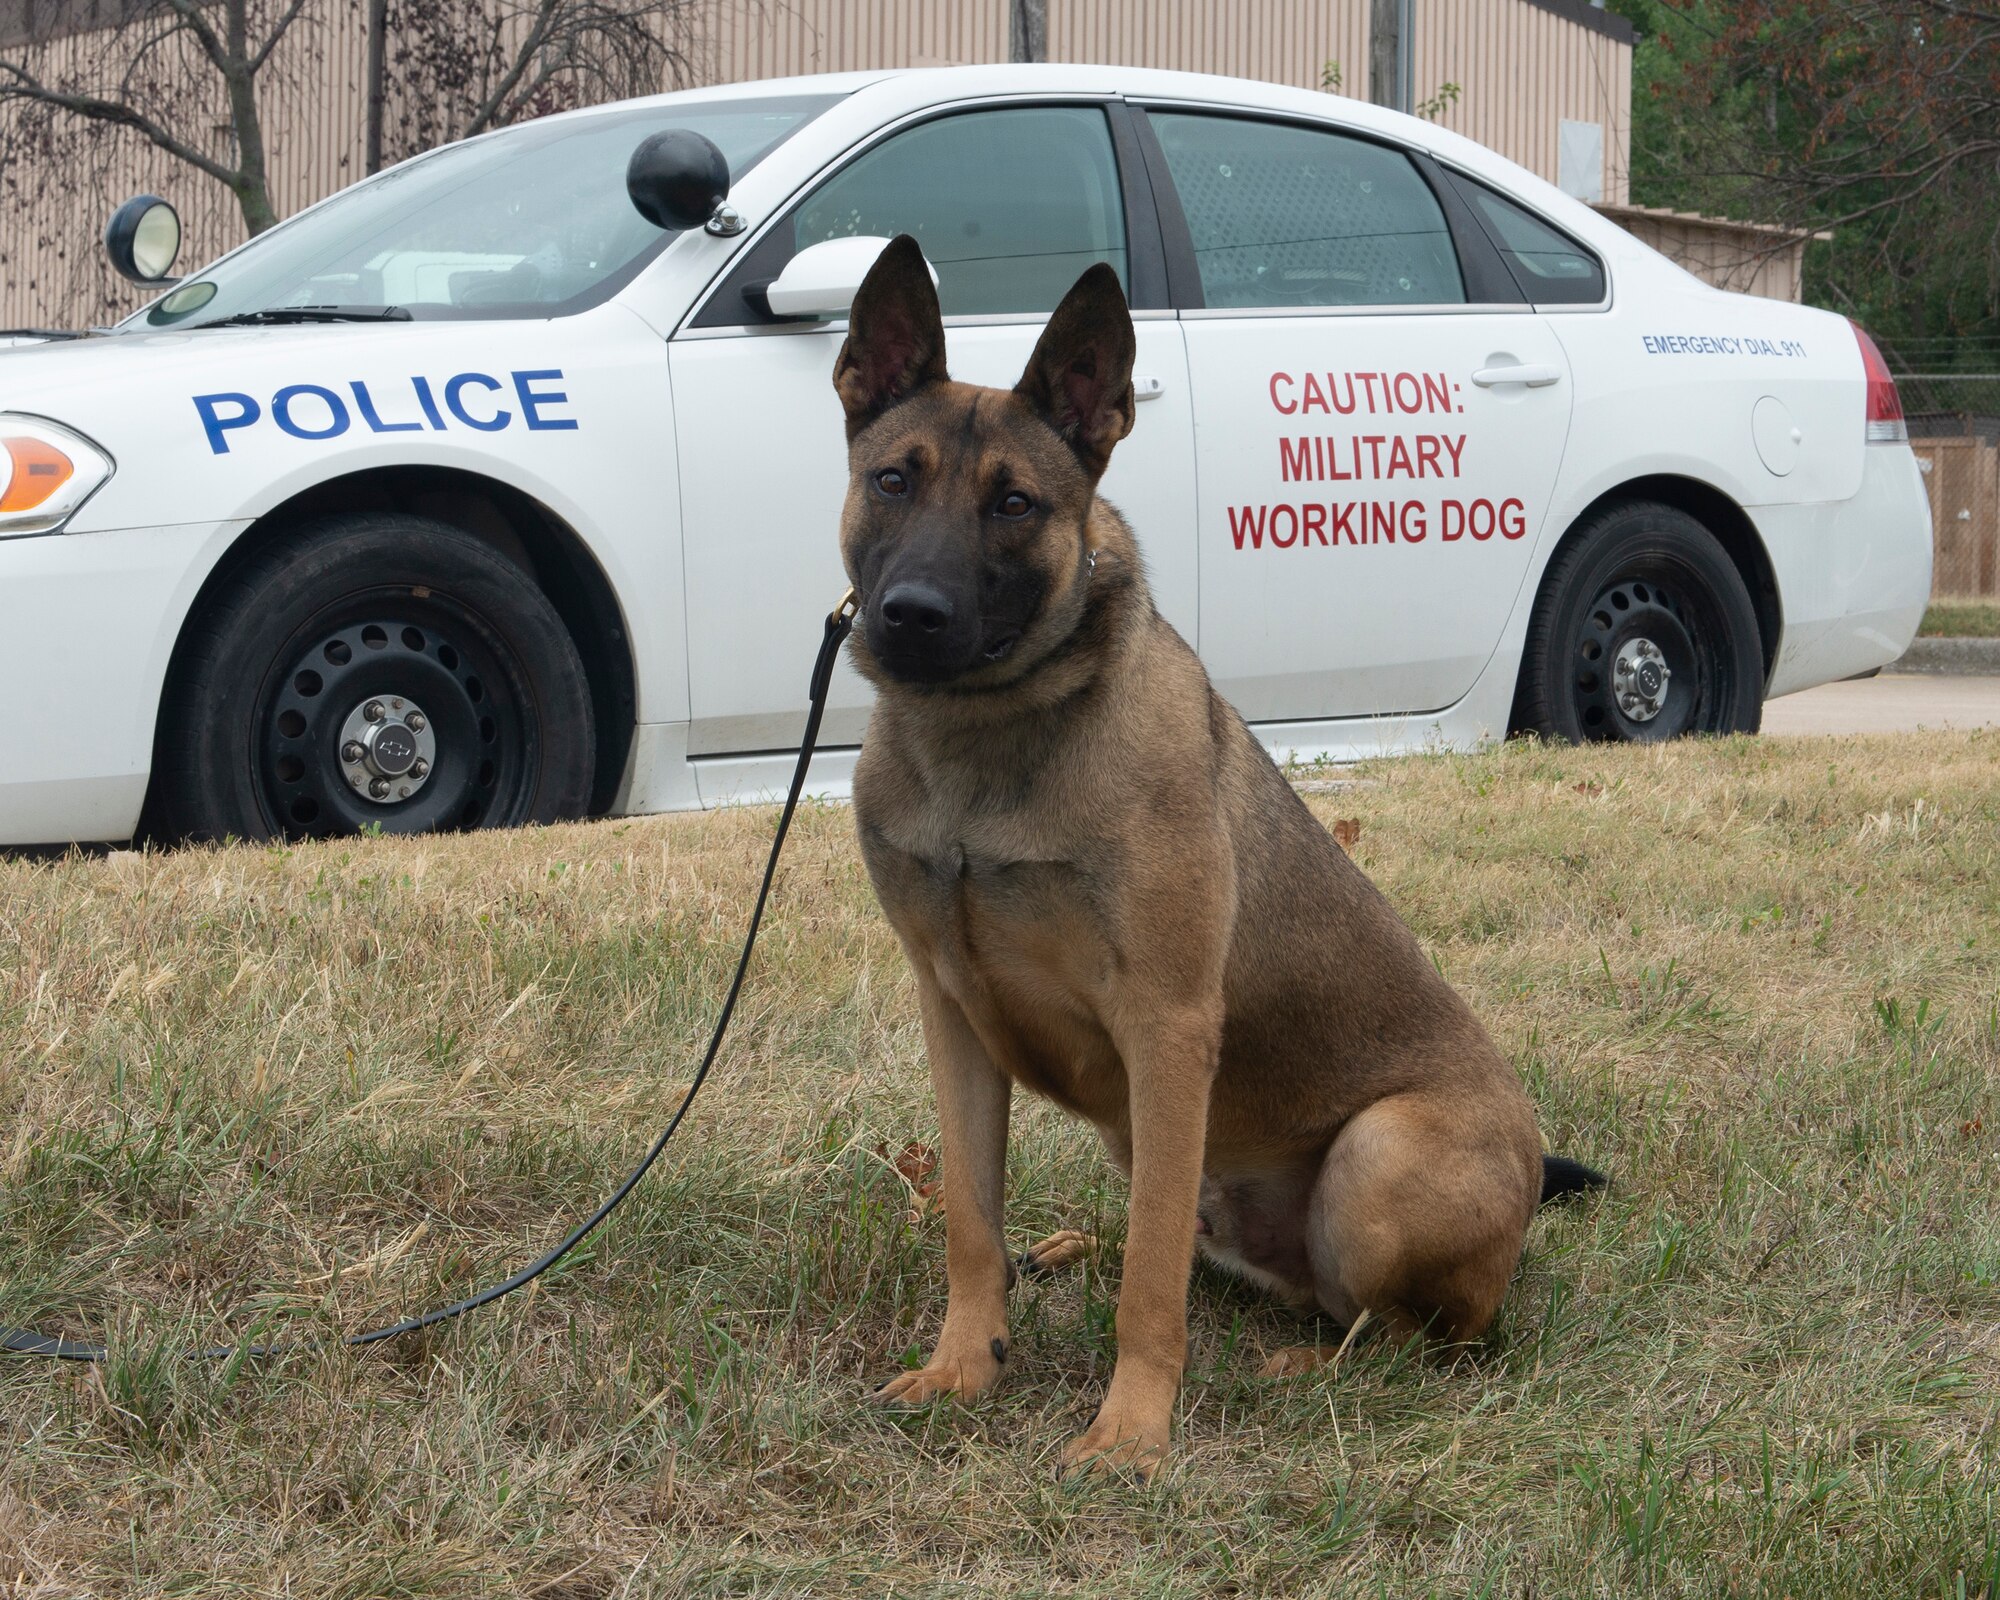 in the foreground a military working dog sitting with a security forces car in background, the dog is sitting perfectly centered, so the words on car read as Police on the left side of the photograph and the and the words Caution Military Working dog on the right side of the photograph